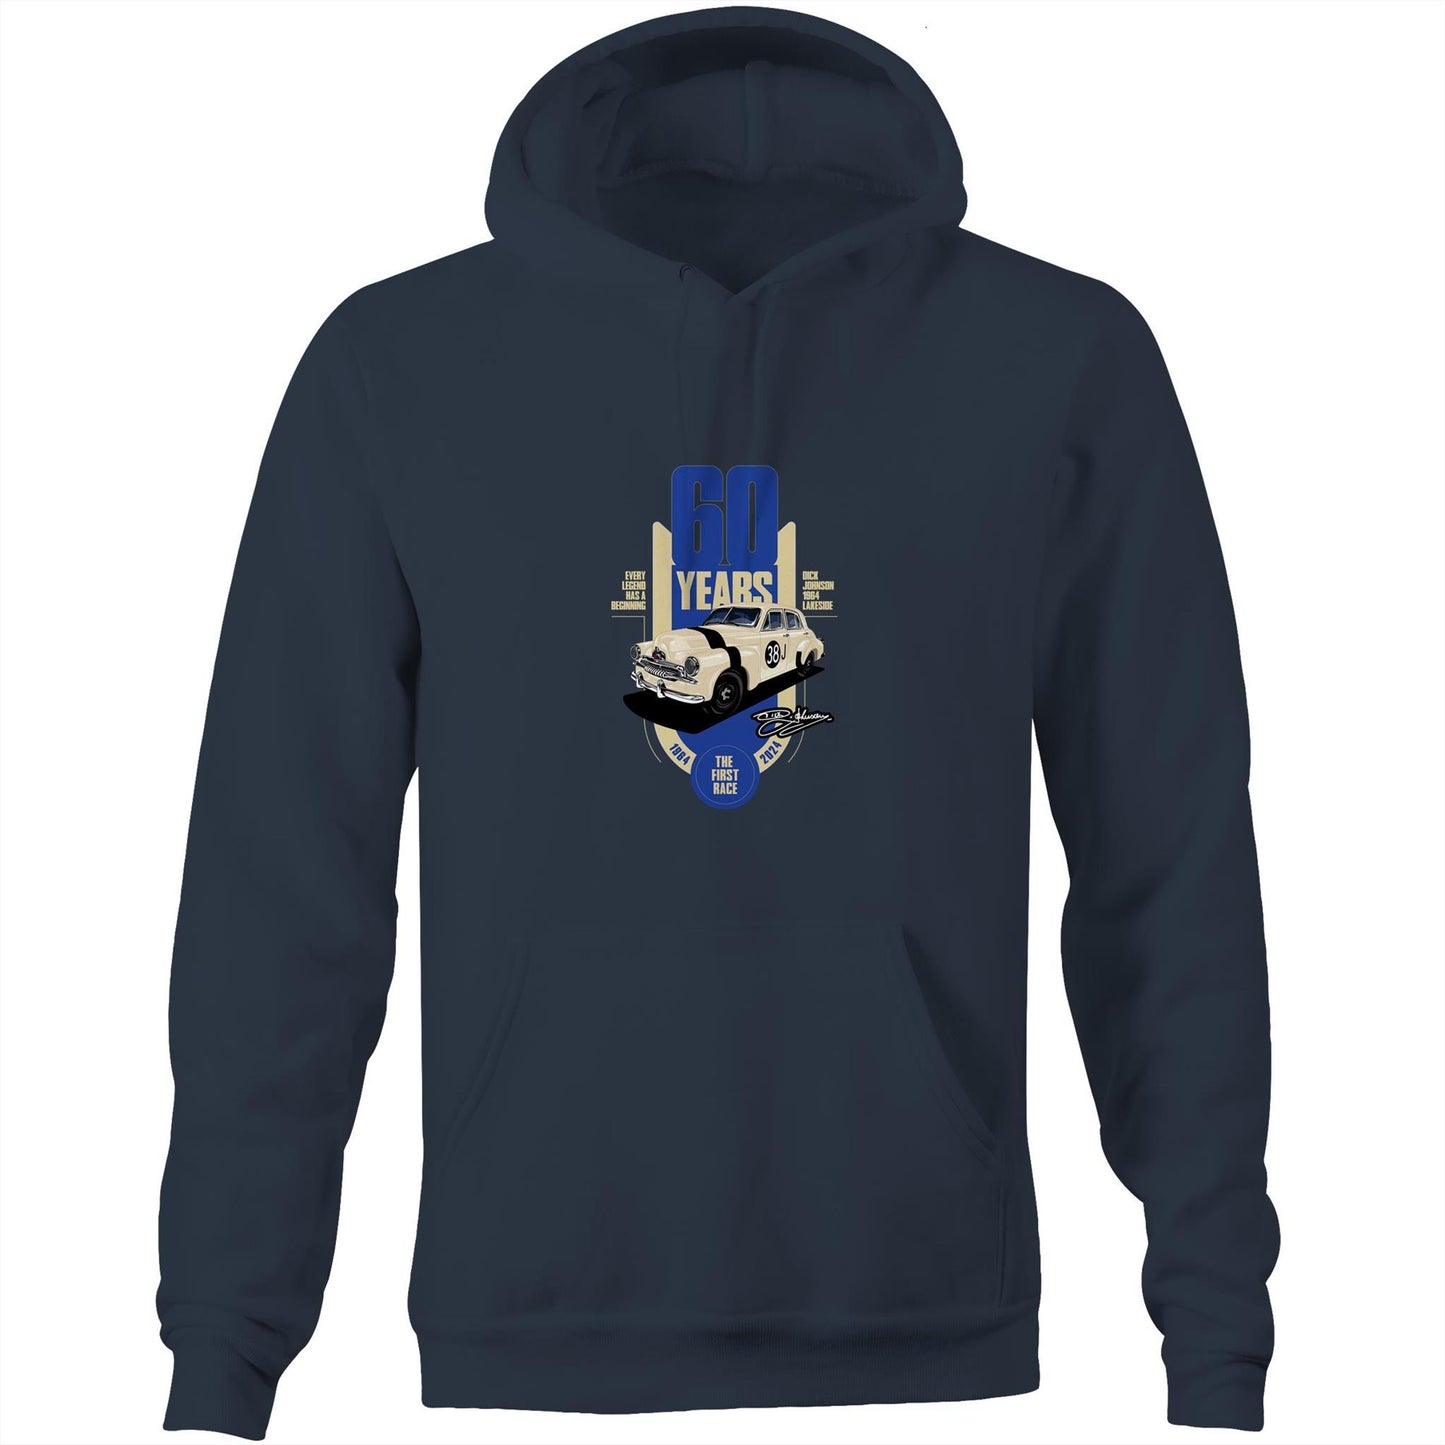 60th Anniversary of Dick Johnson's First Race Hoodie